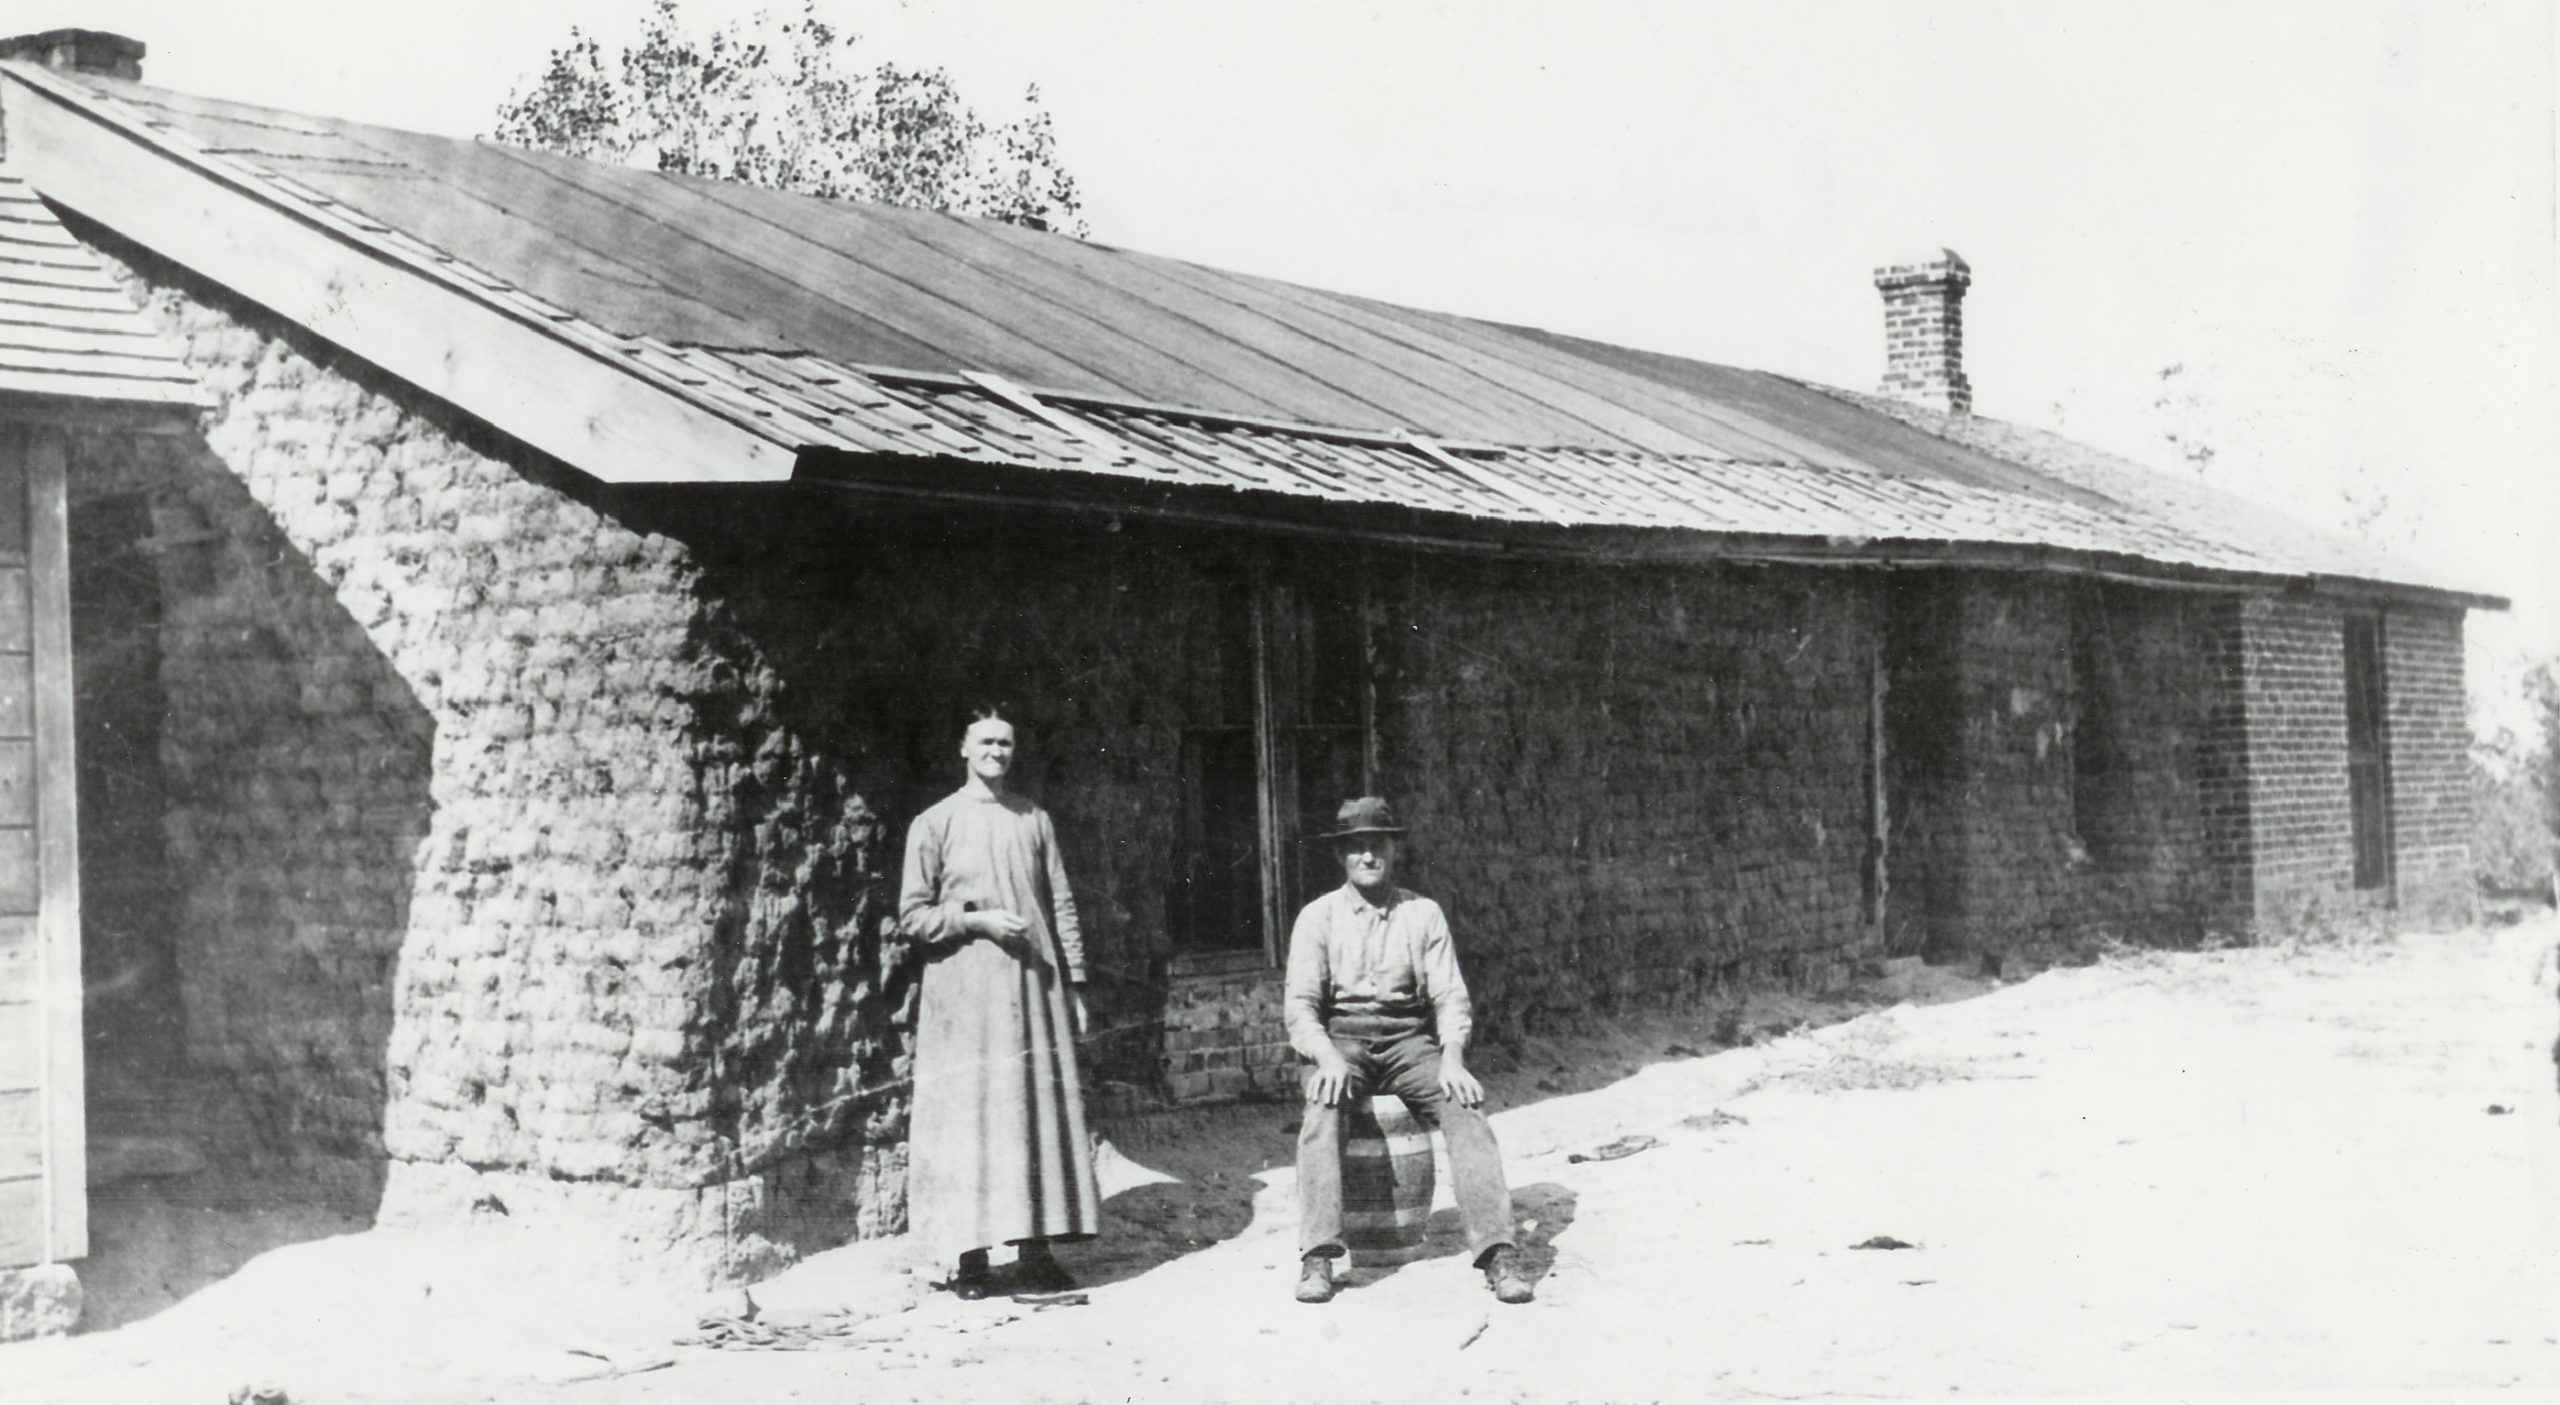 Couple in Front of Sod House